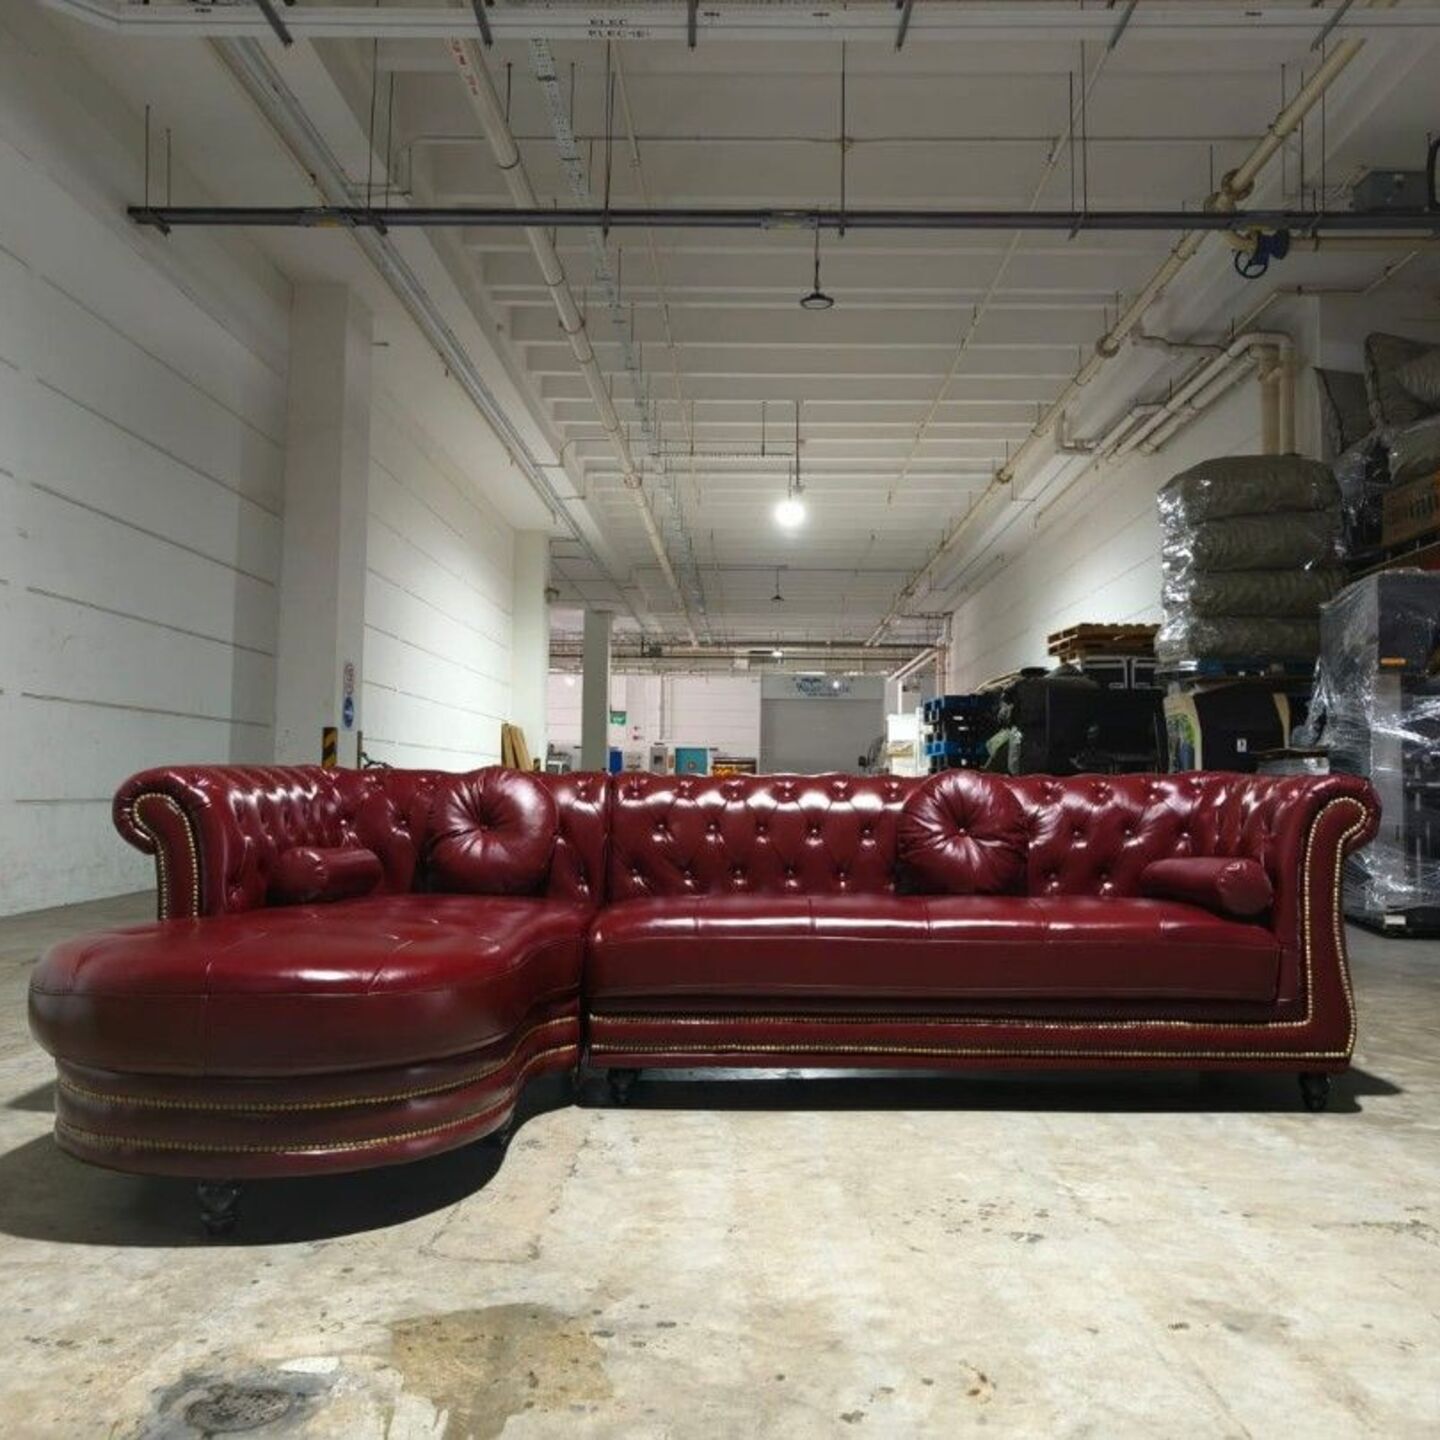 (PRE-ORDER)ELYSIUM 4 Seater L-Shaped Chesterfield Sofa in BURGUNDY FULL Genuine Leather